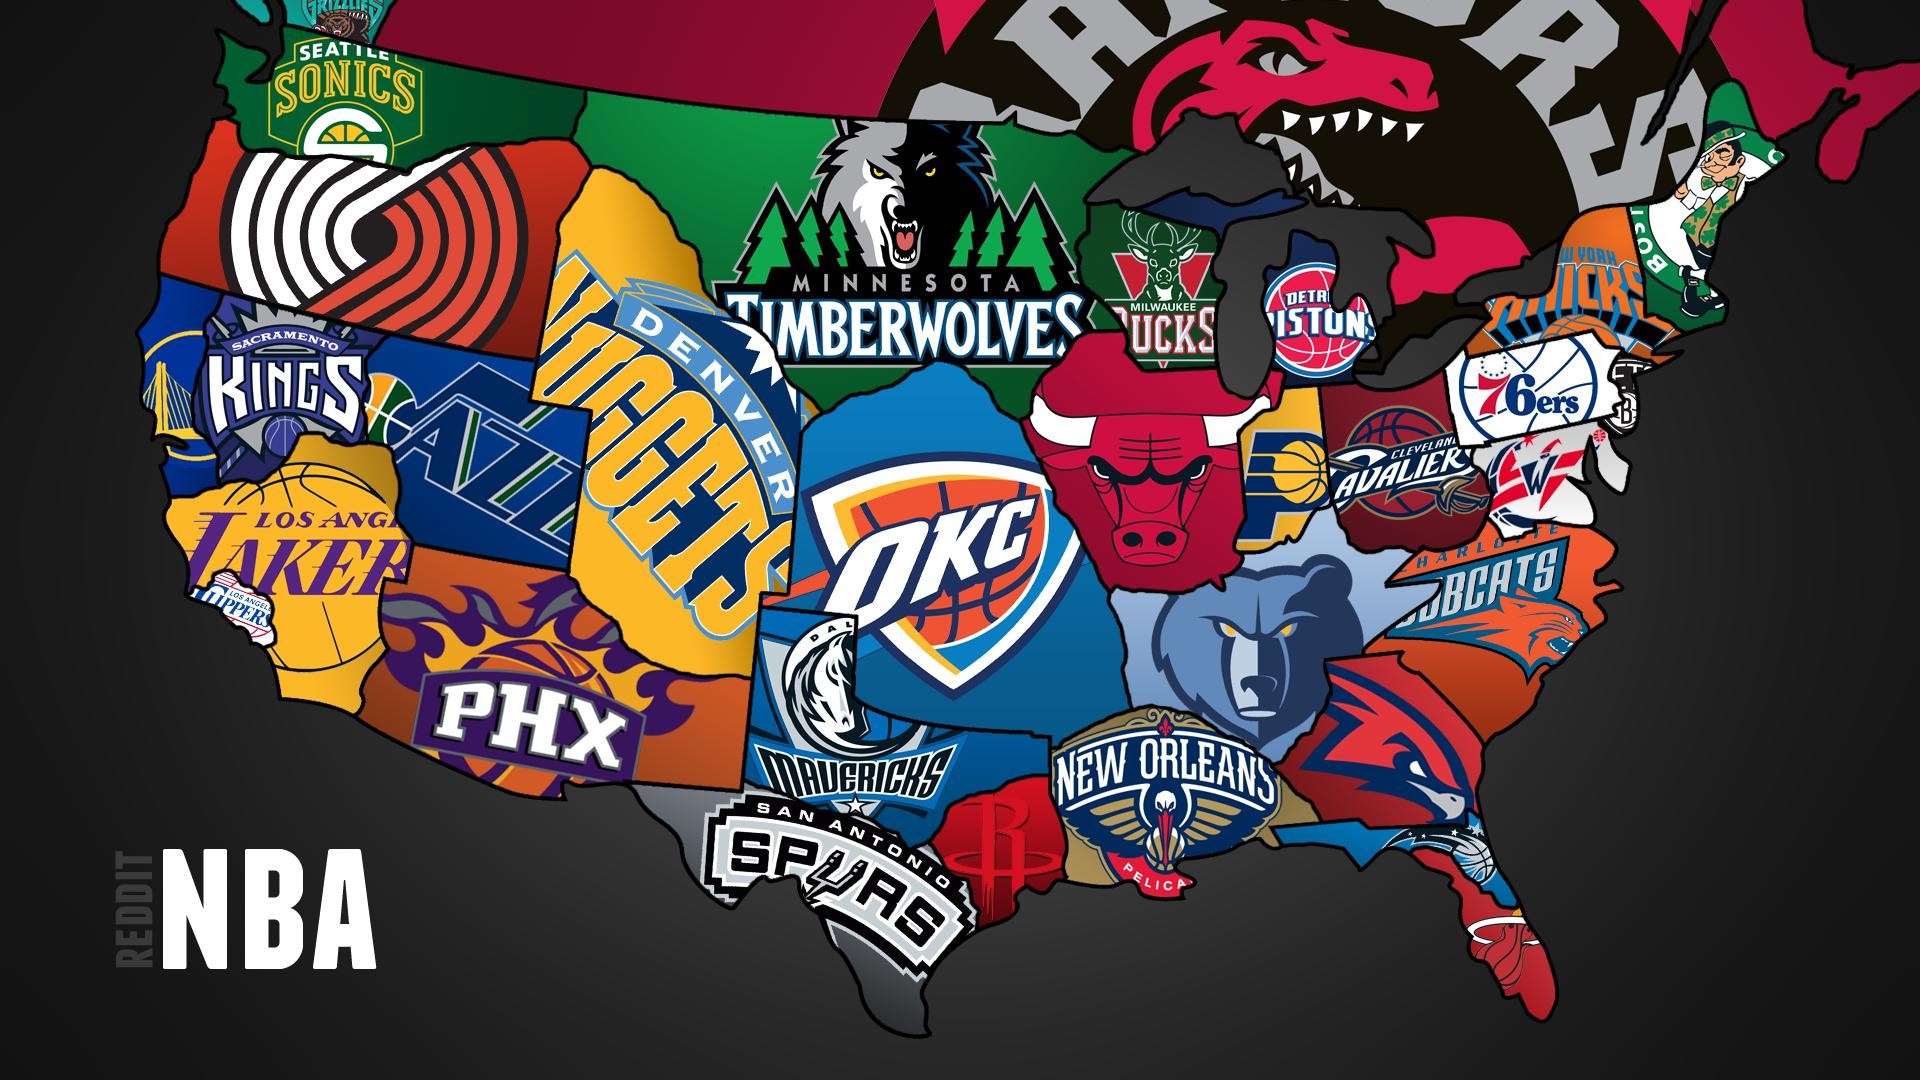 Wallpapers NBA with image dimensions 1920x1080 pixel. You can make this wallpaper for your Desktop Computer Backgrounds, Windows or Mac Screensavers, iPhone Lock screen, Tablet or Android and another Mobile Phone device